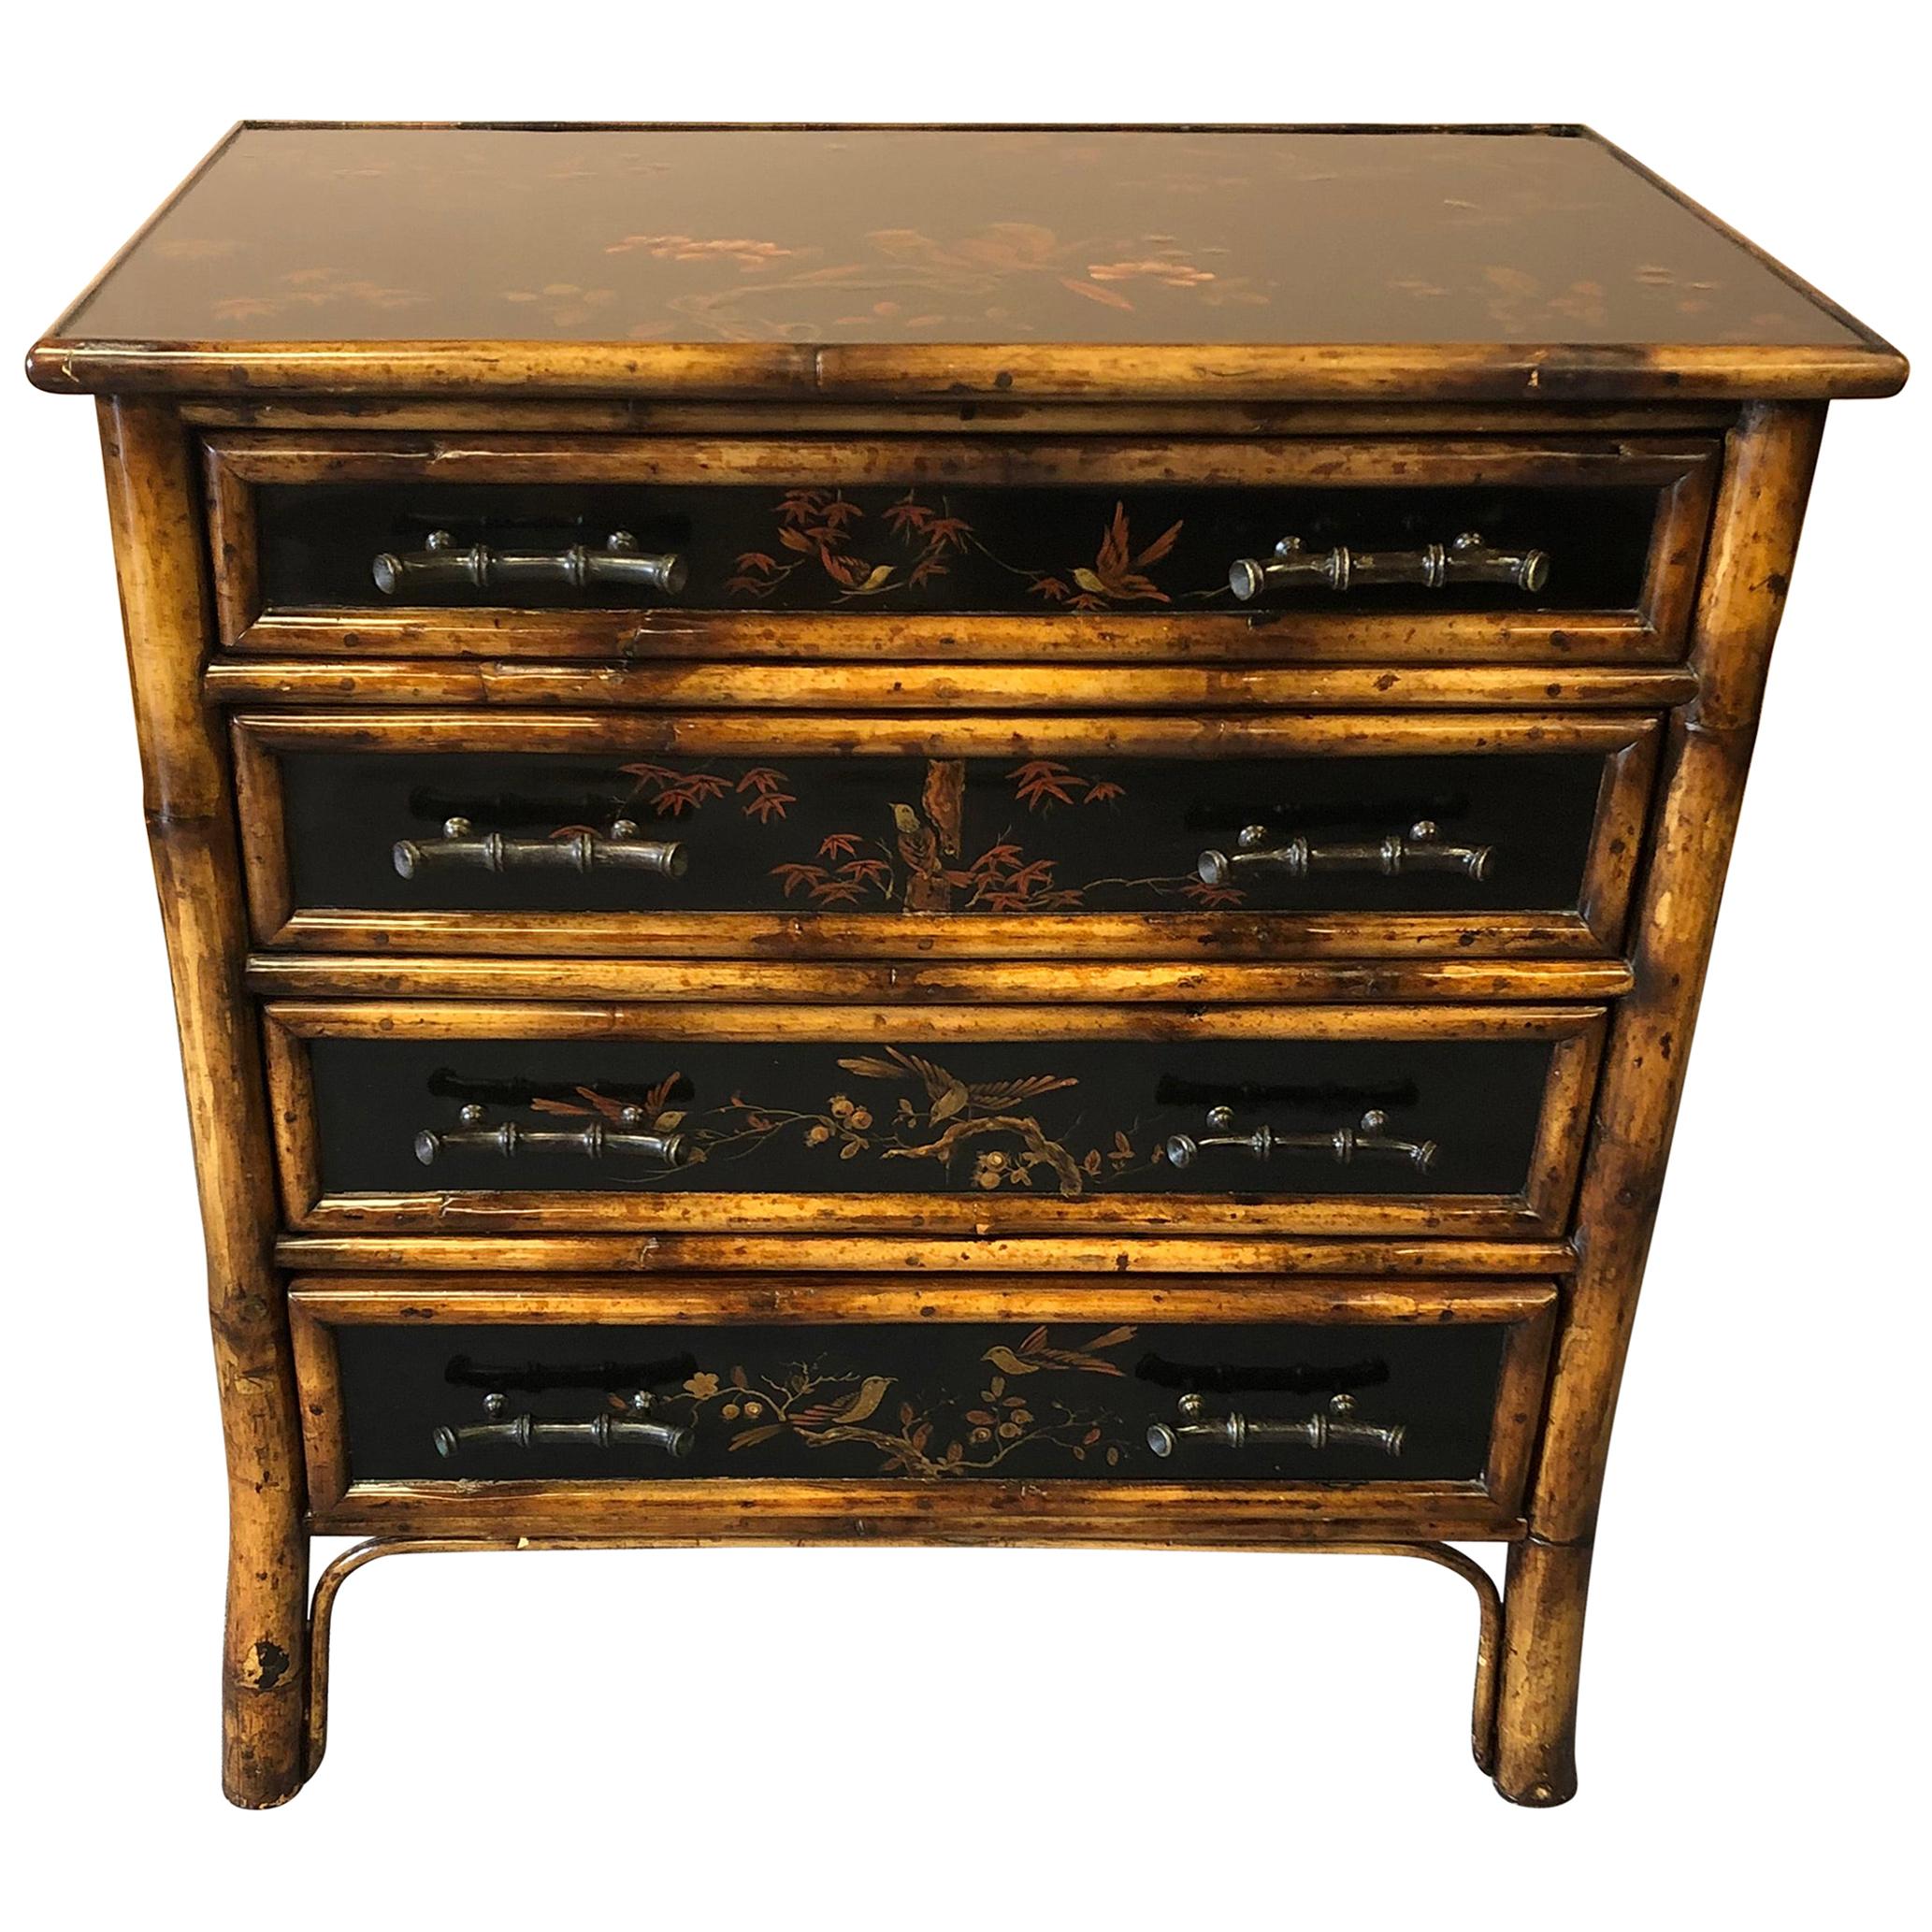 Handsome Small Faux Bamboo Chinoiserie Decorated Chest of Drawers Commode